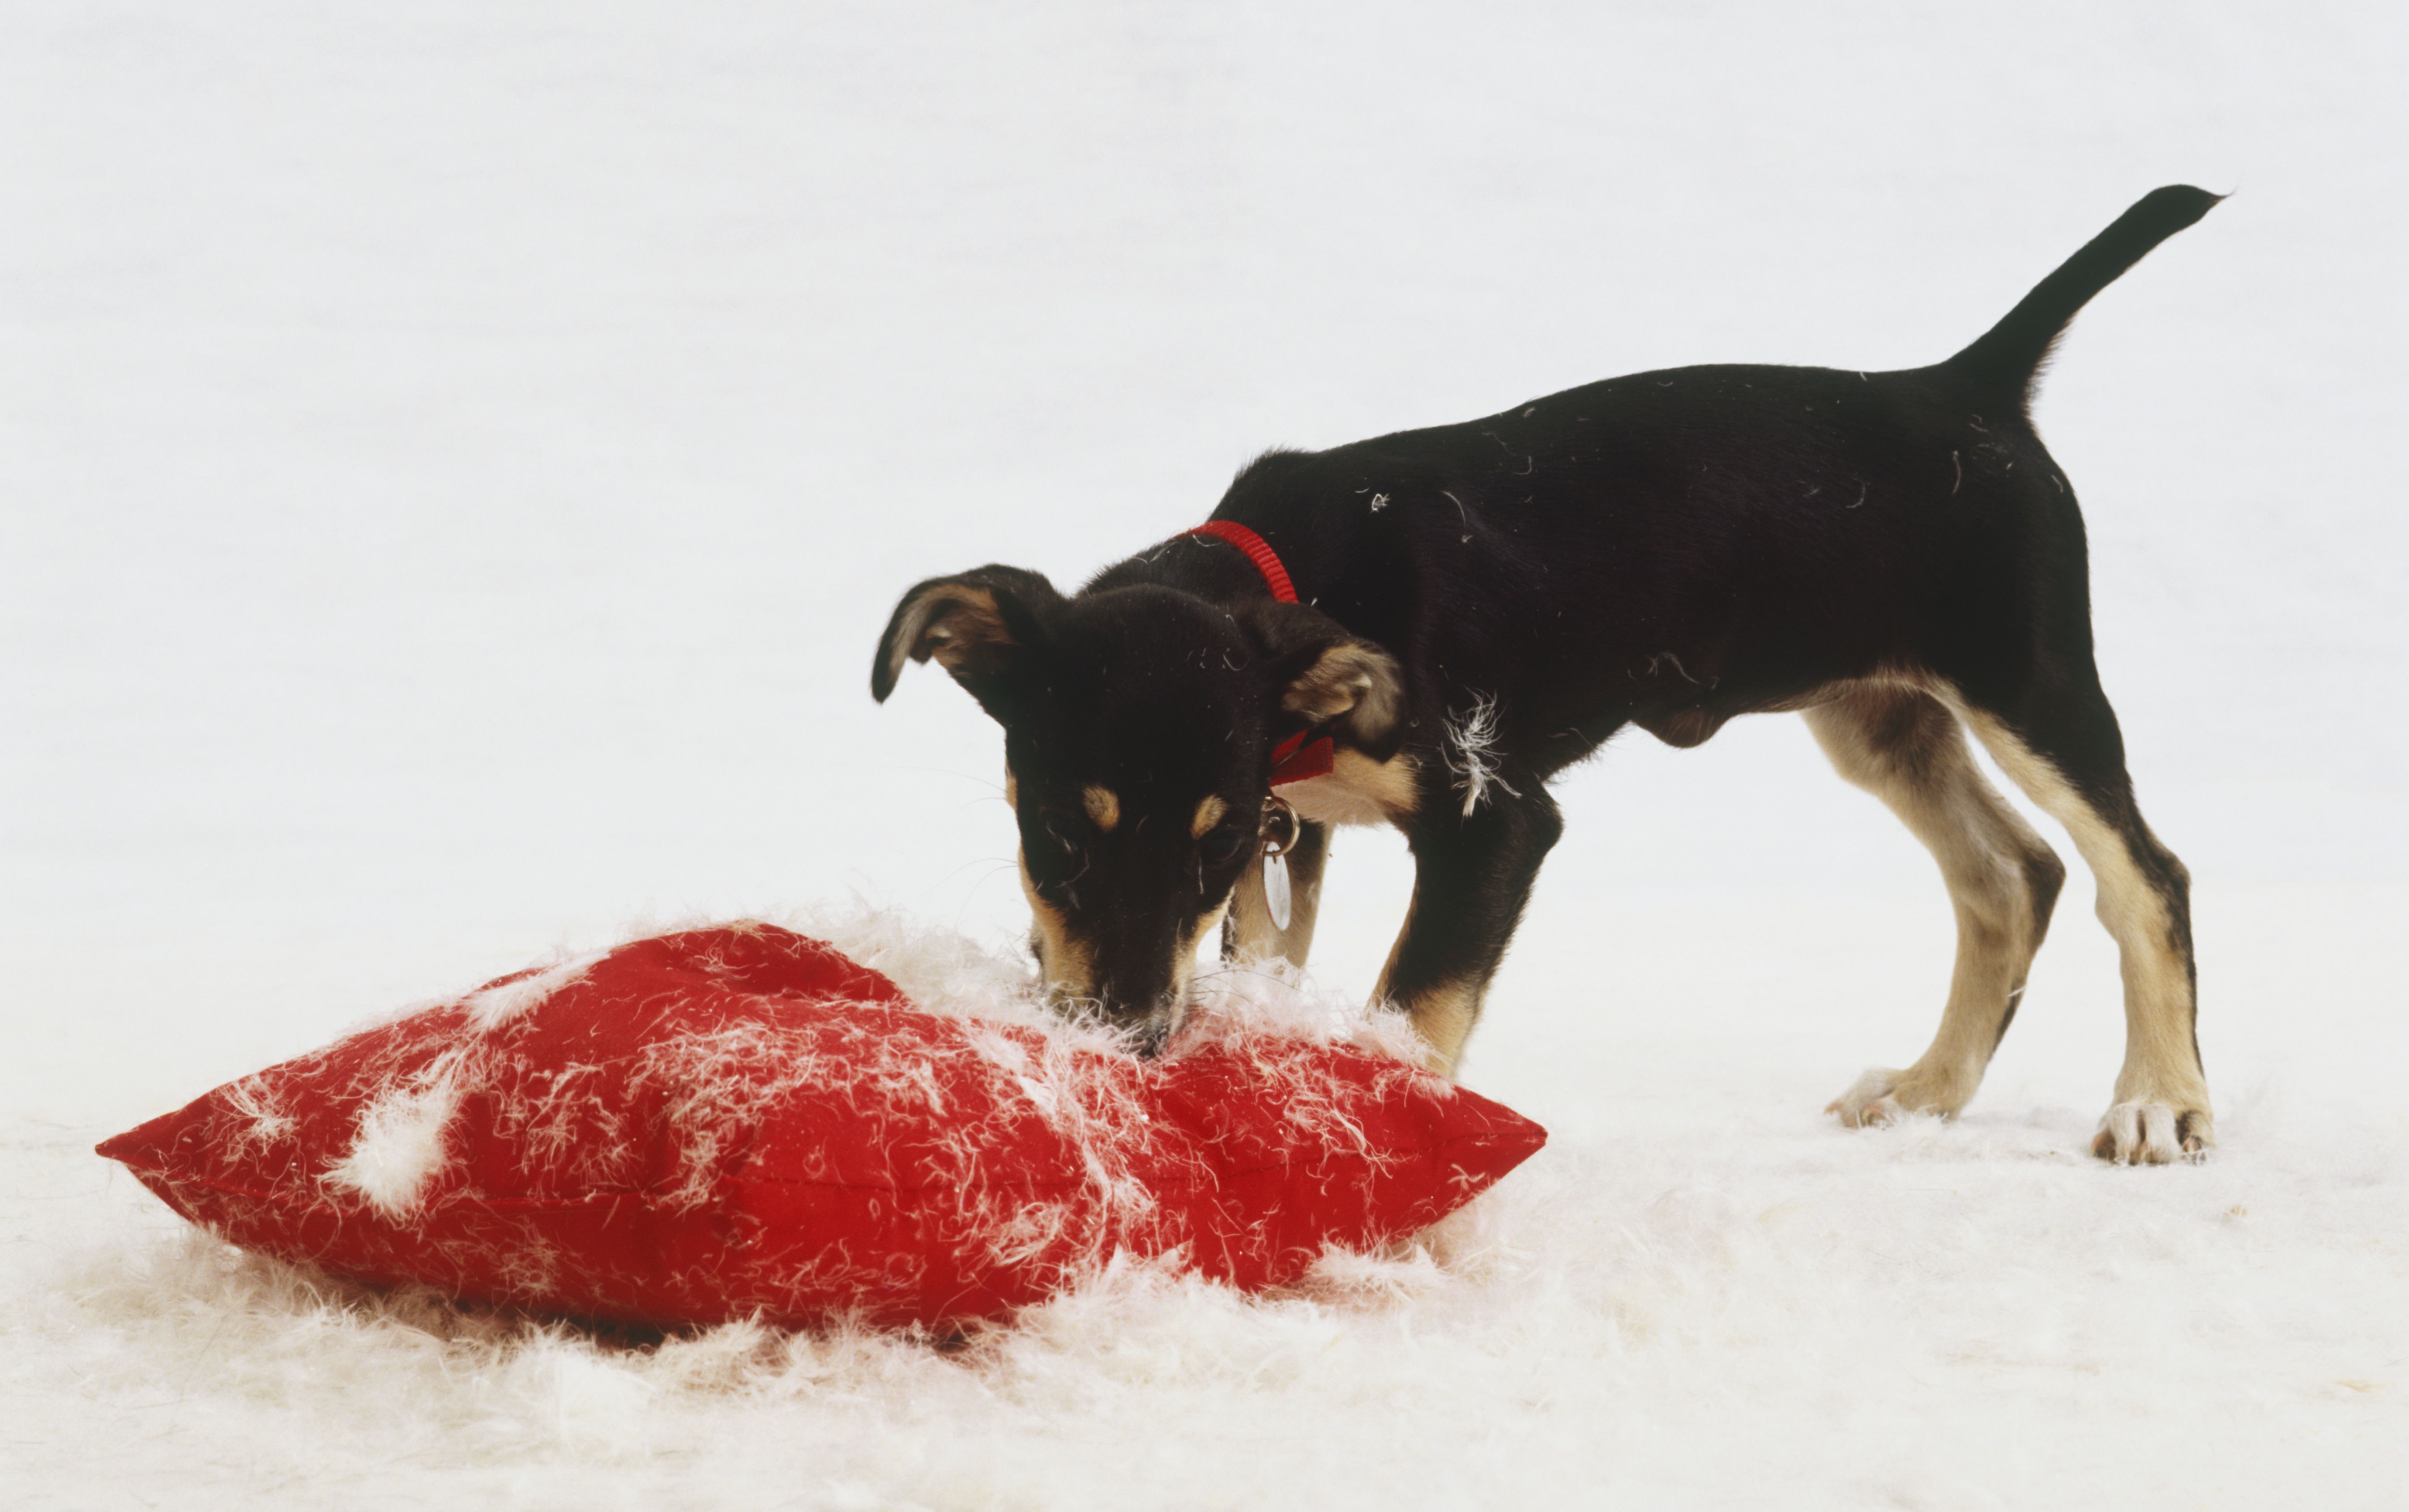 Black puppy destroying a red pillow with the stuffing everywhere.